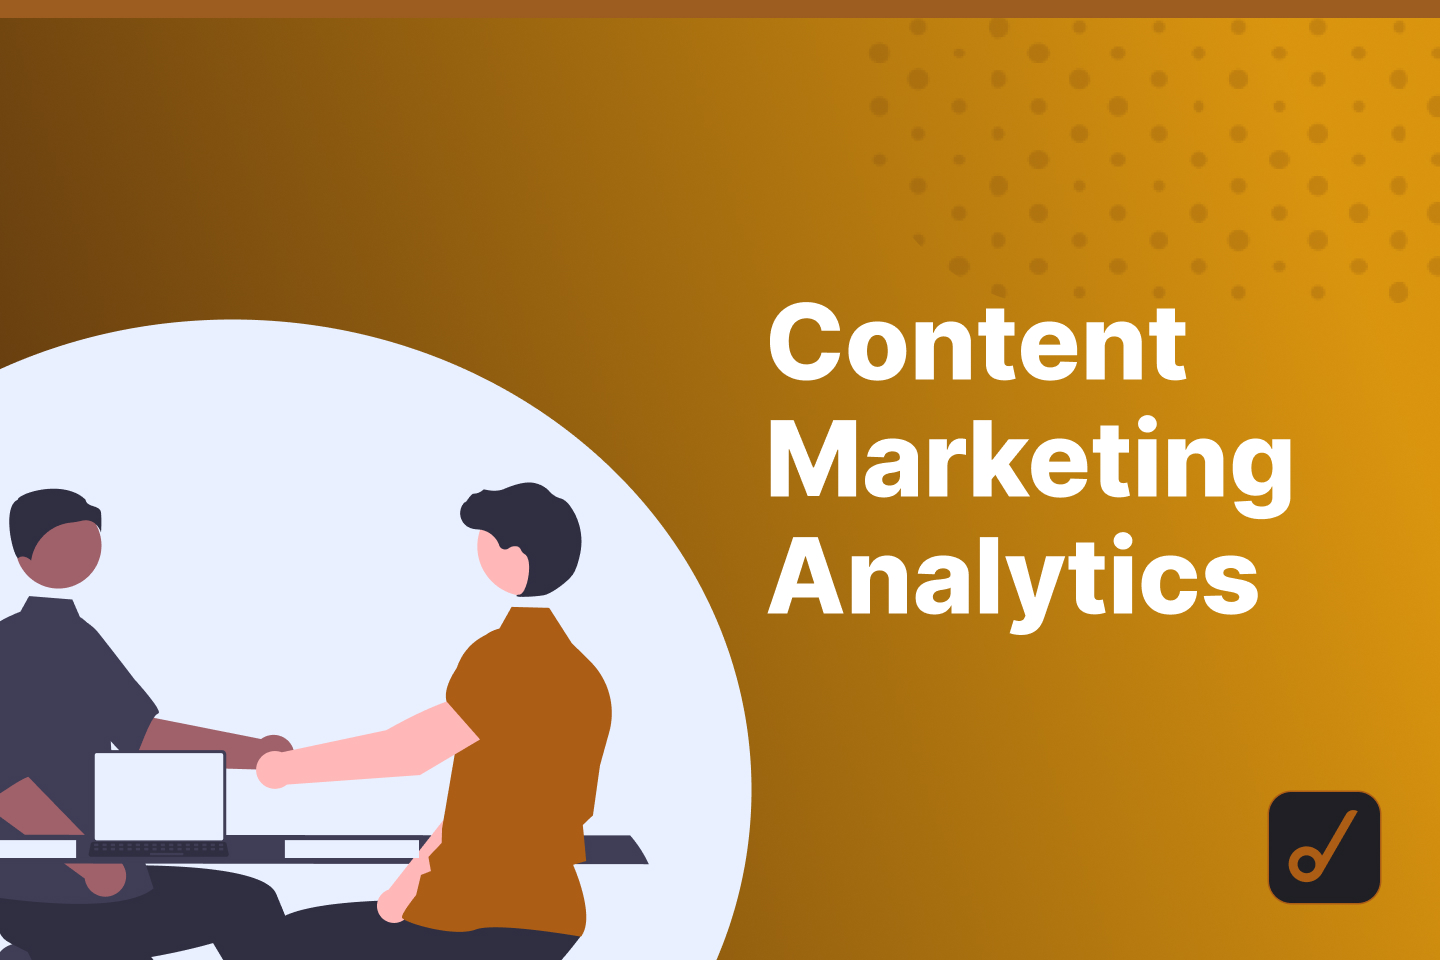 Content Marketing Analytics: Top Questions, Tools, and Metrics